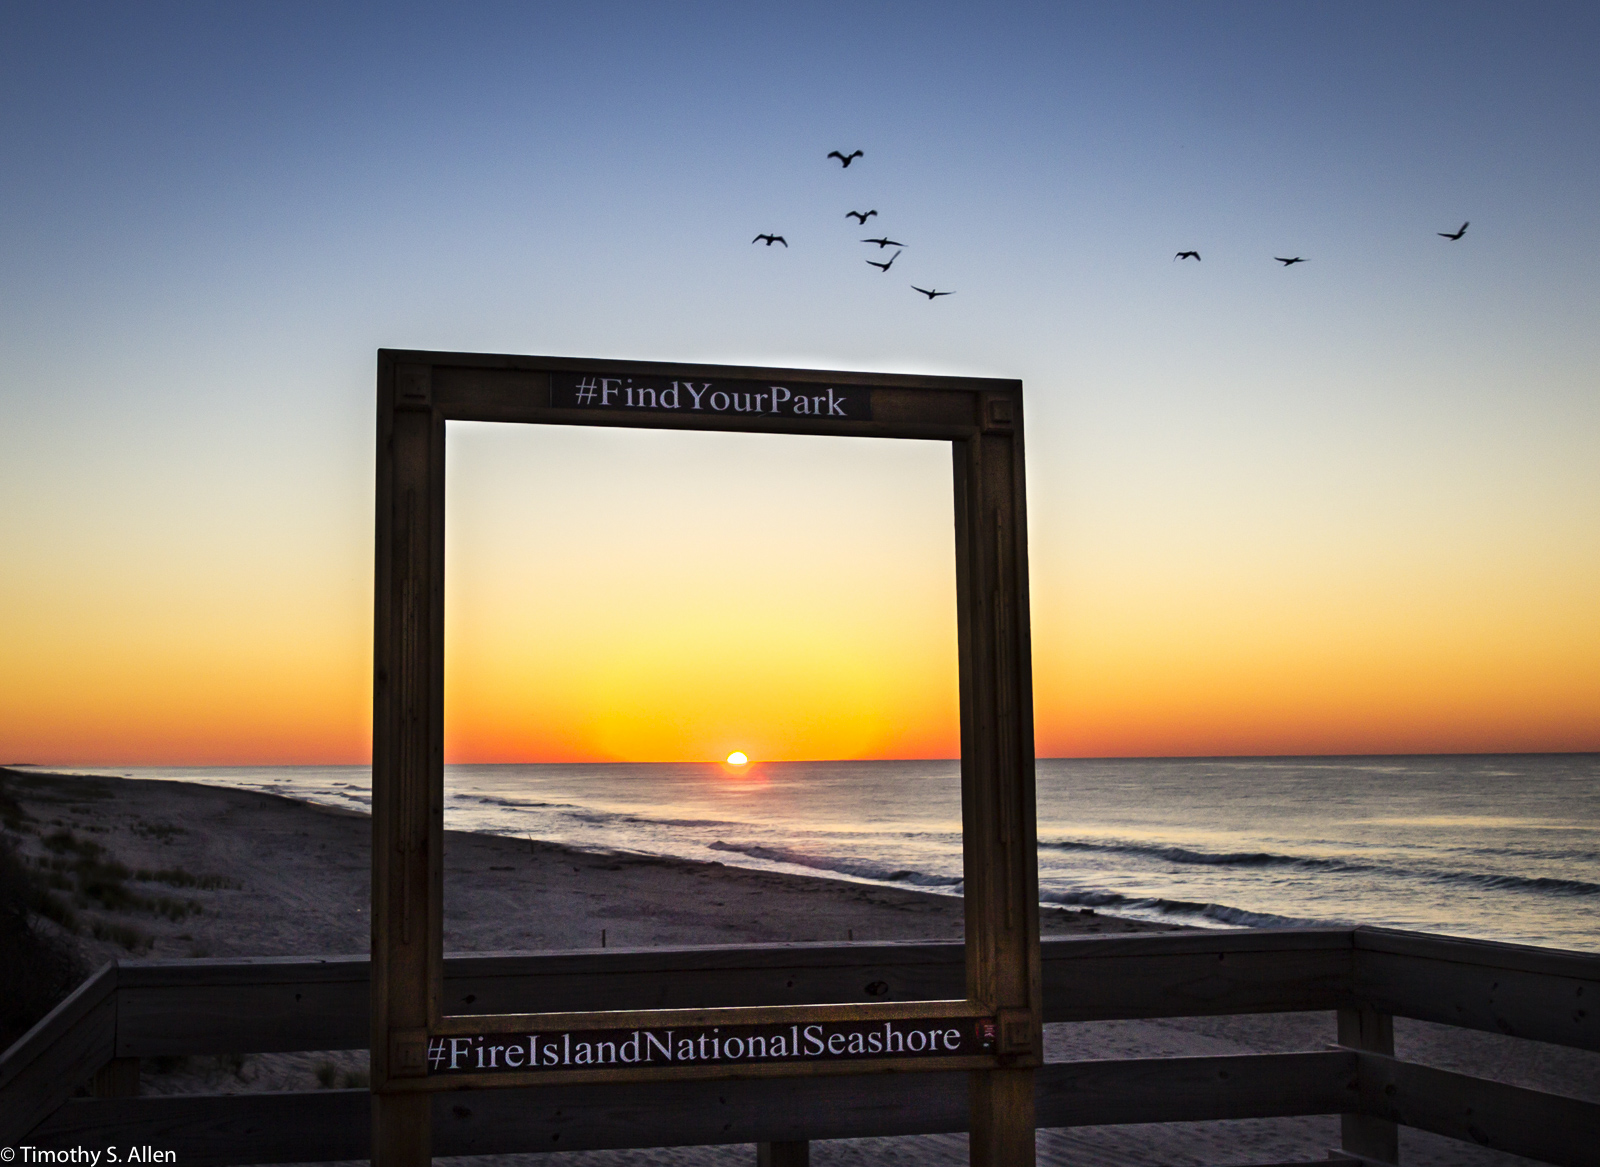 Sunrise over Fire Island National Seashore, Beach at Watch Hill Visitors Center, Fire Island, NY, USA September 15, 2015 This is the last of the Fire Island Series